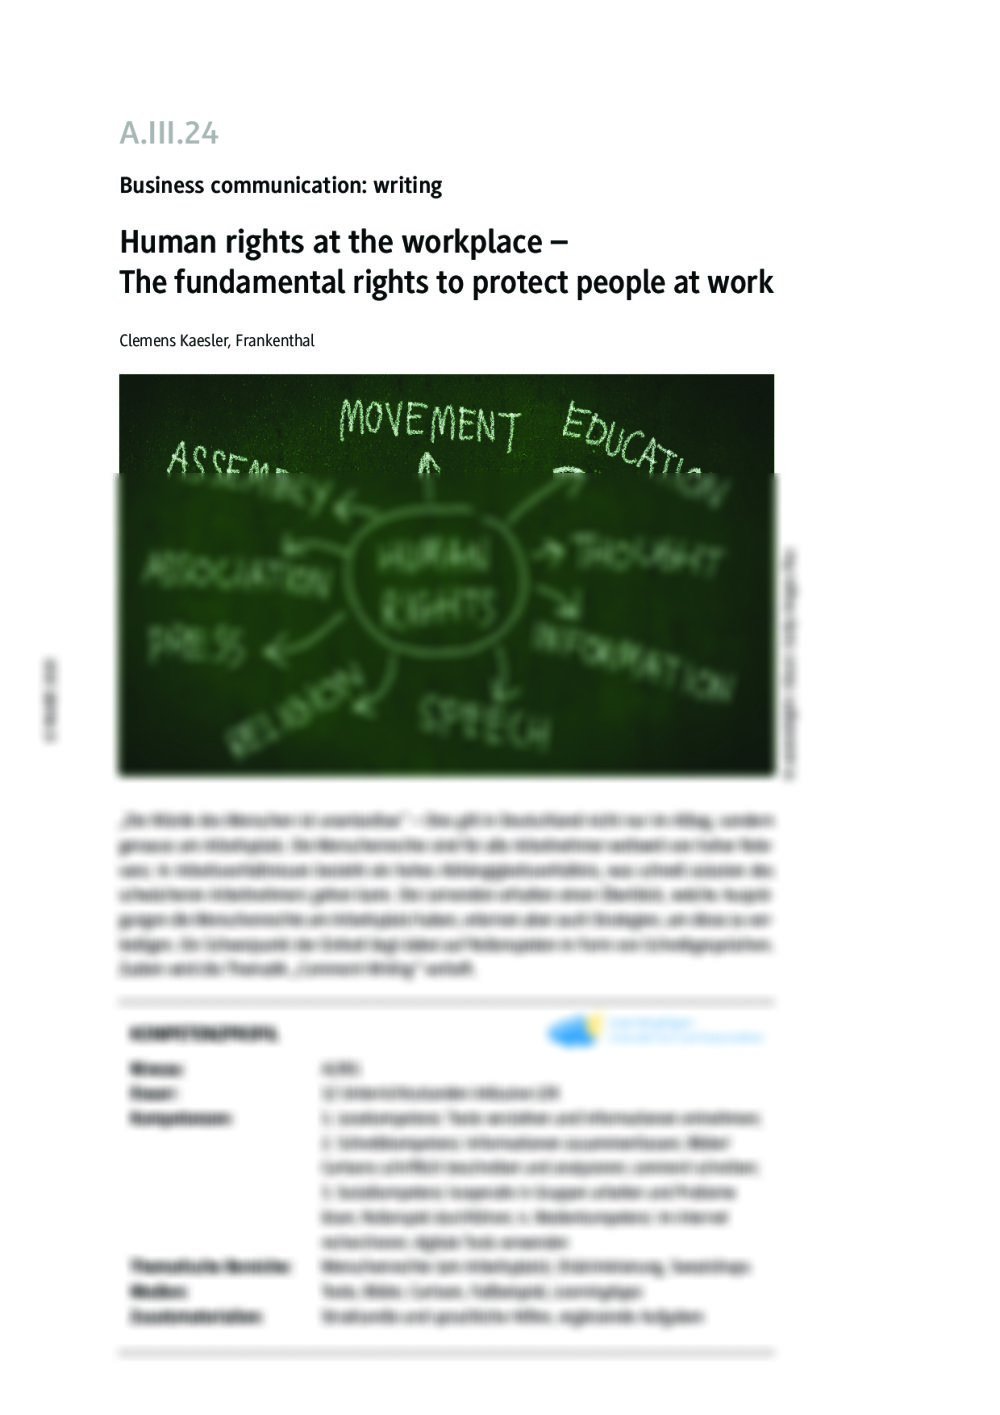 Human rights at the workplace - Seite 1